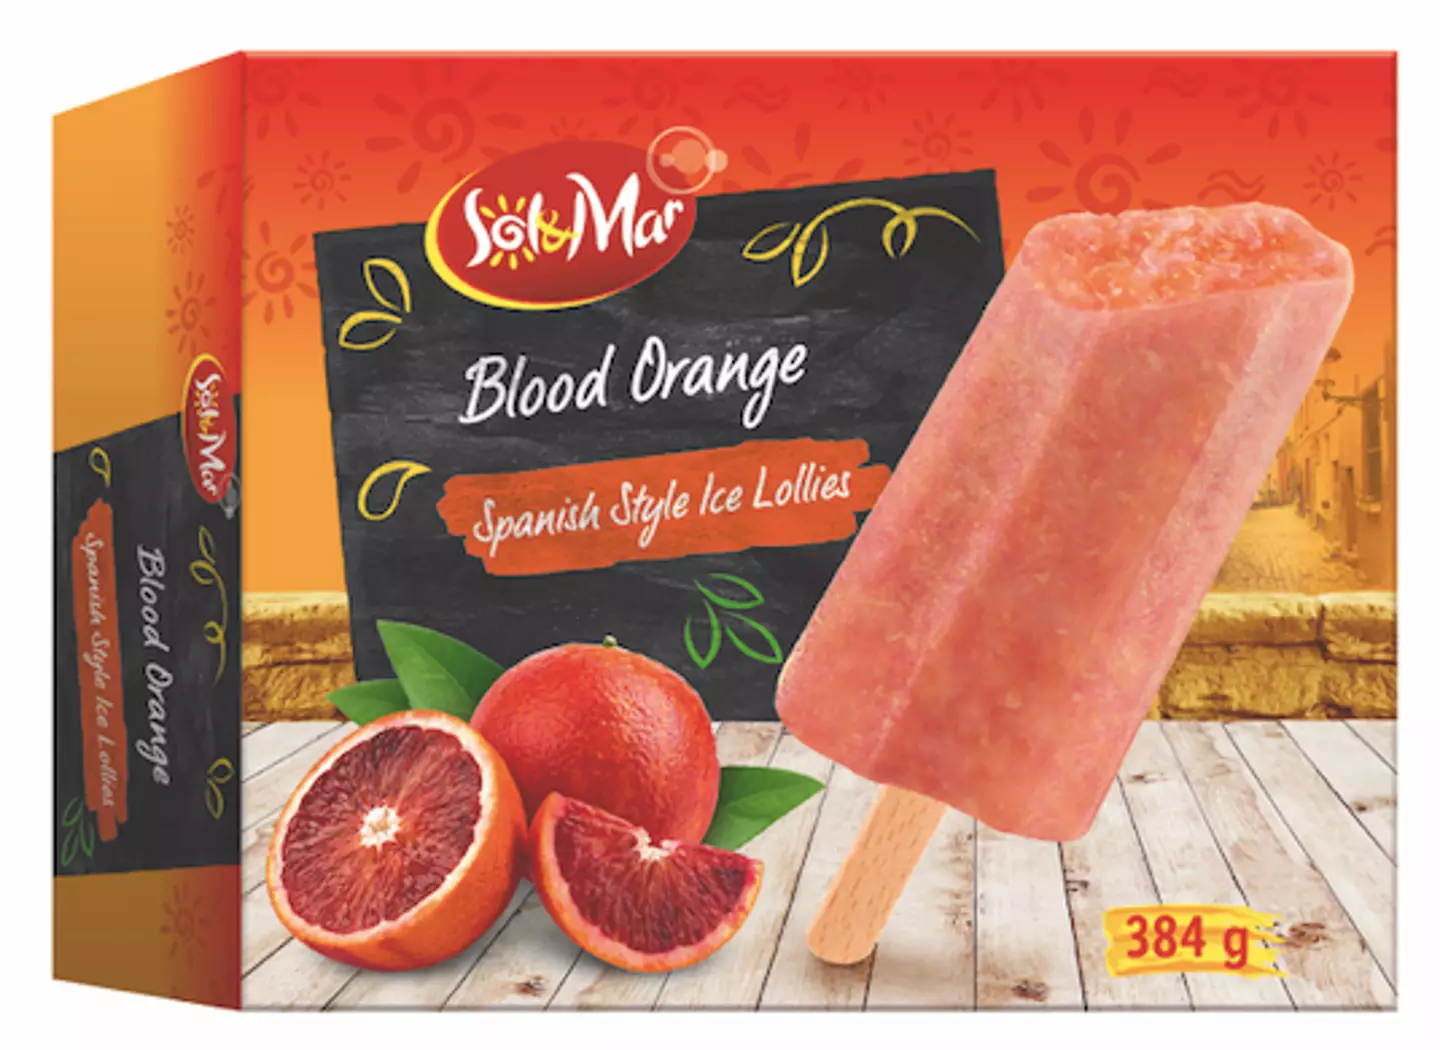 There's a tasty blood orange flavour, too (